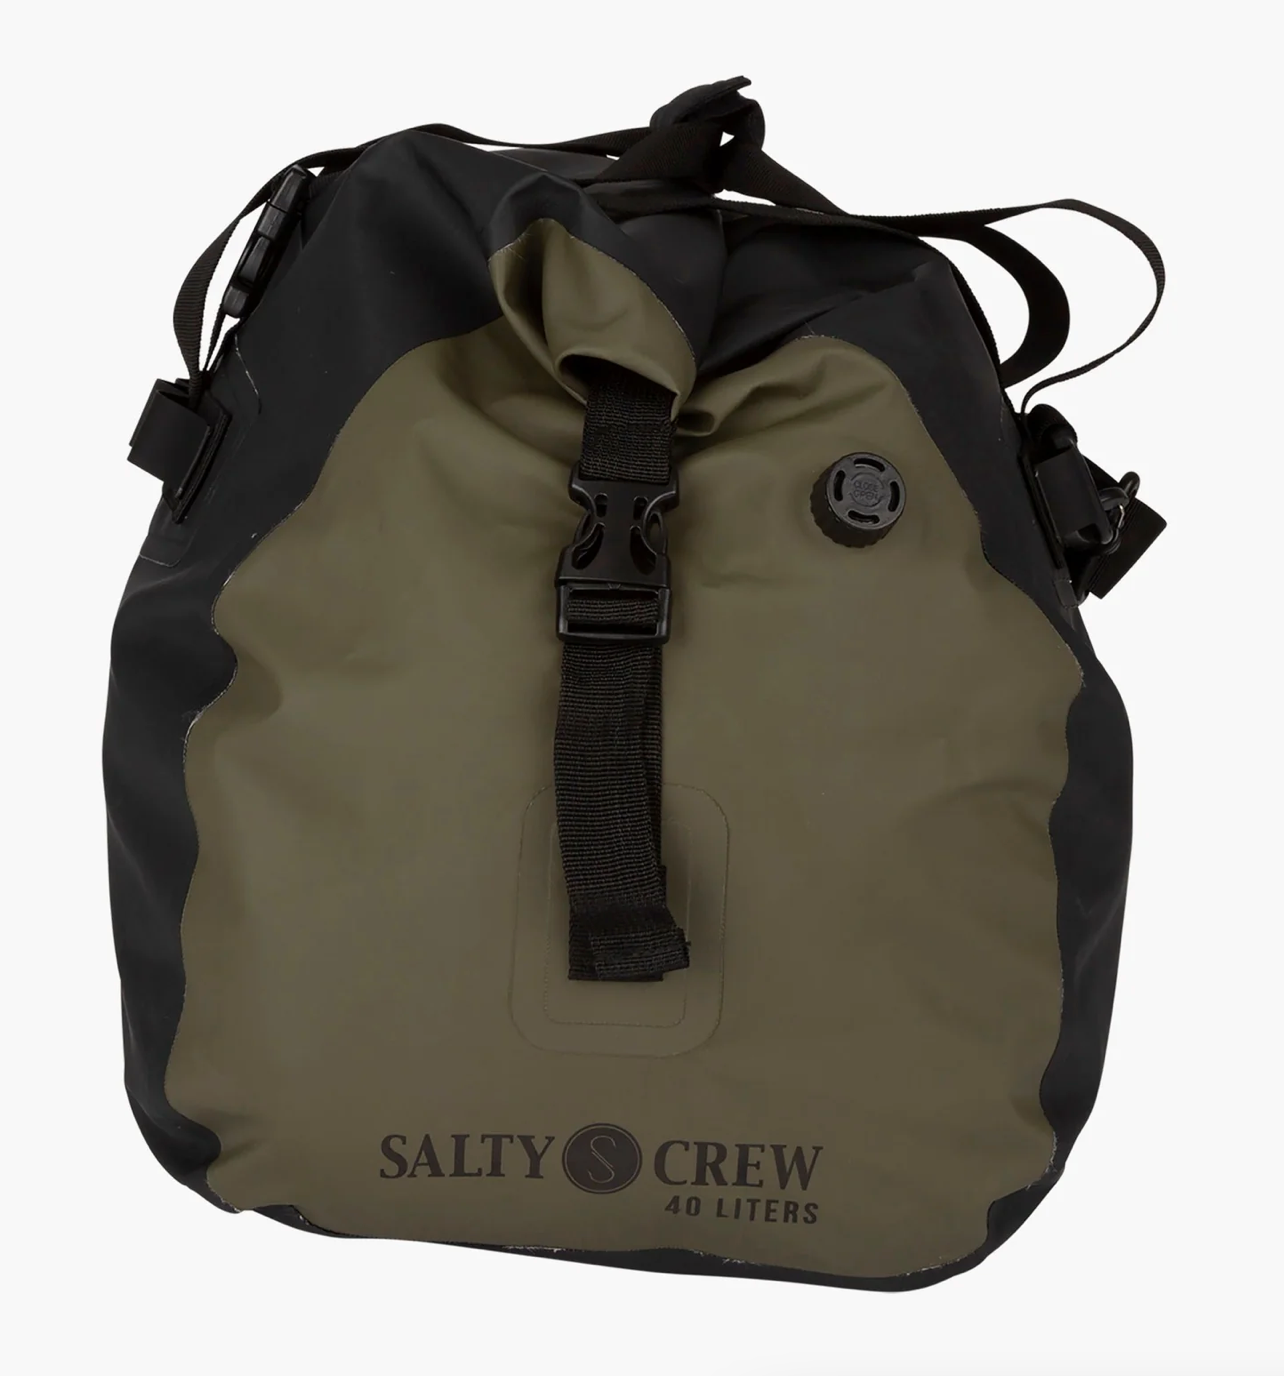 SALTY CREW   VOYAGER BLACK/MILITARY DUFFLE